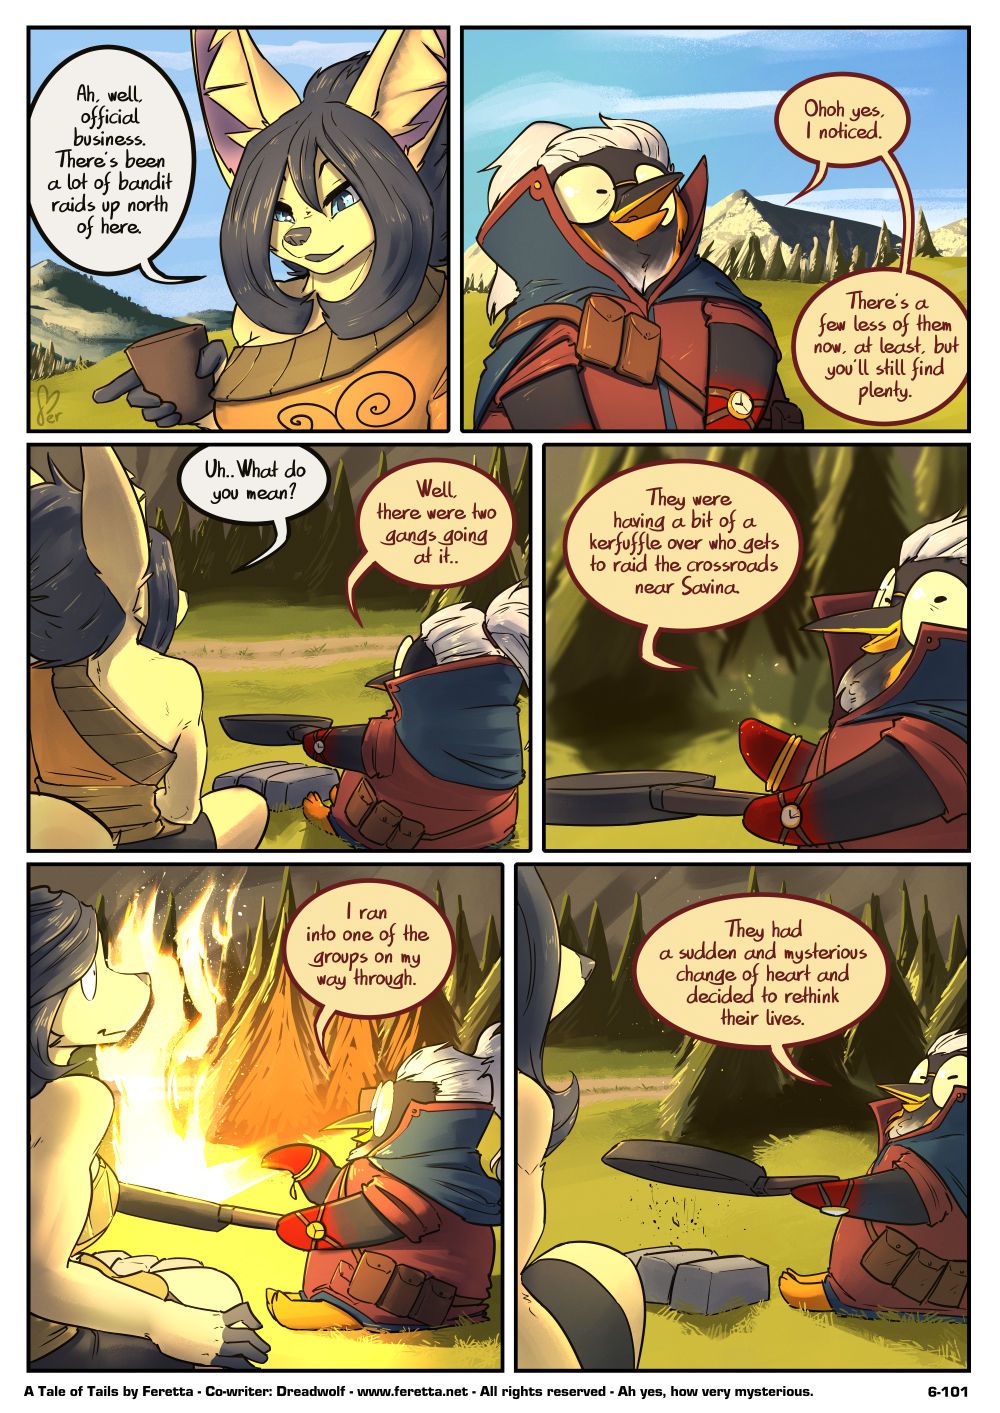 [Feretta] Farellian Legends: A Tale of Tails (w/Extras) [Ongoing] 396